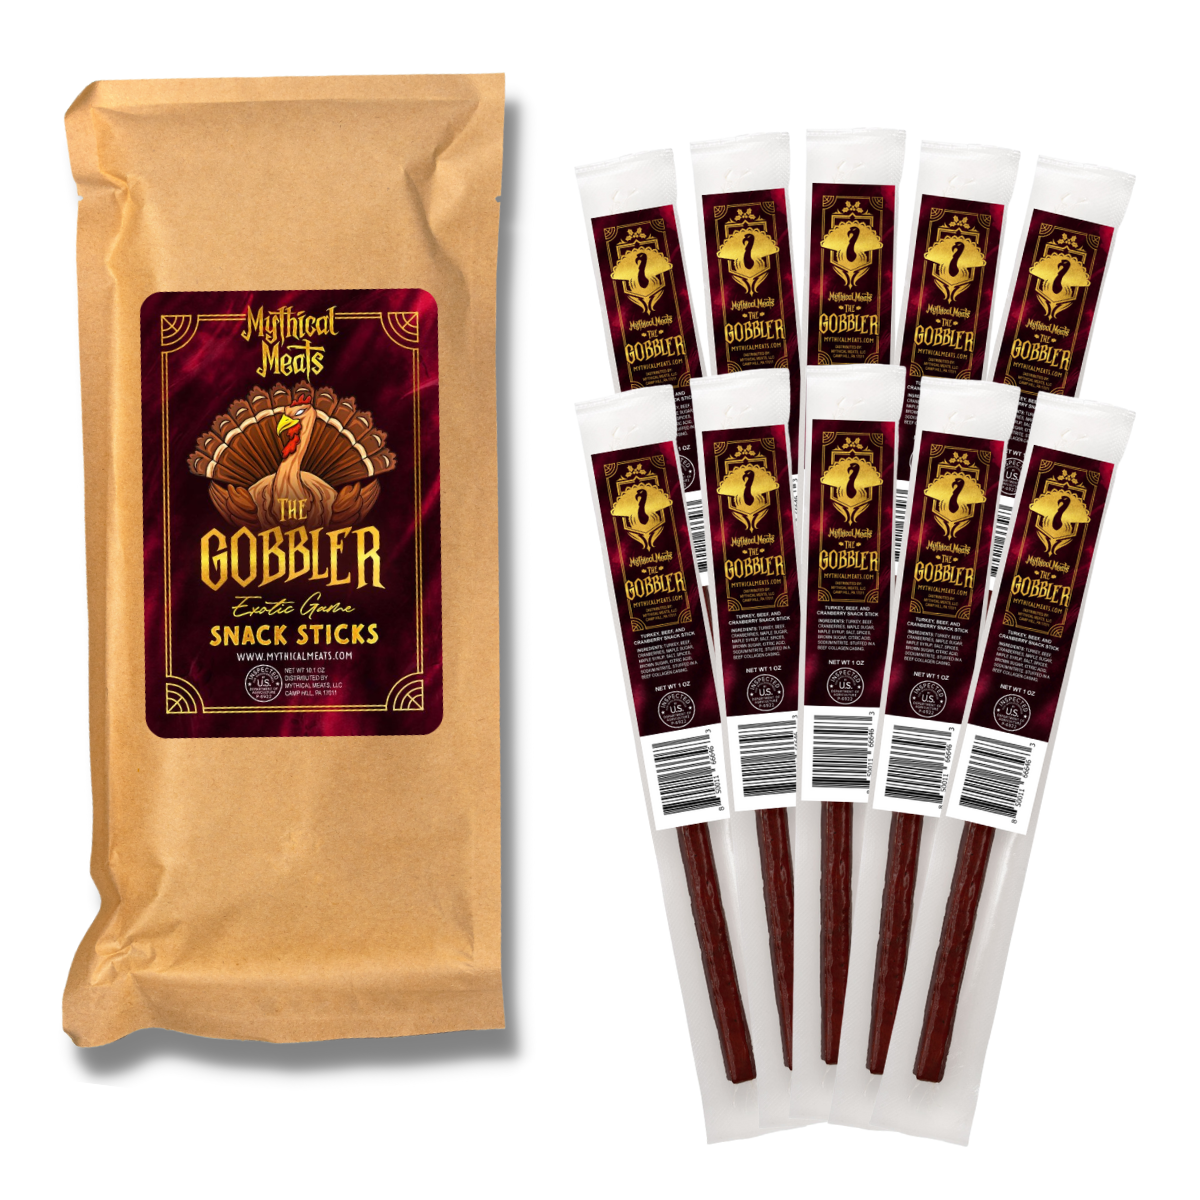 The Gobbler Limited Edition Pack